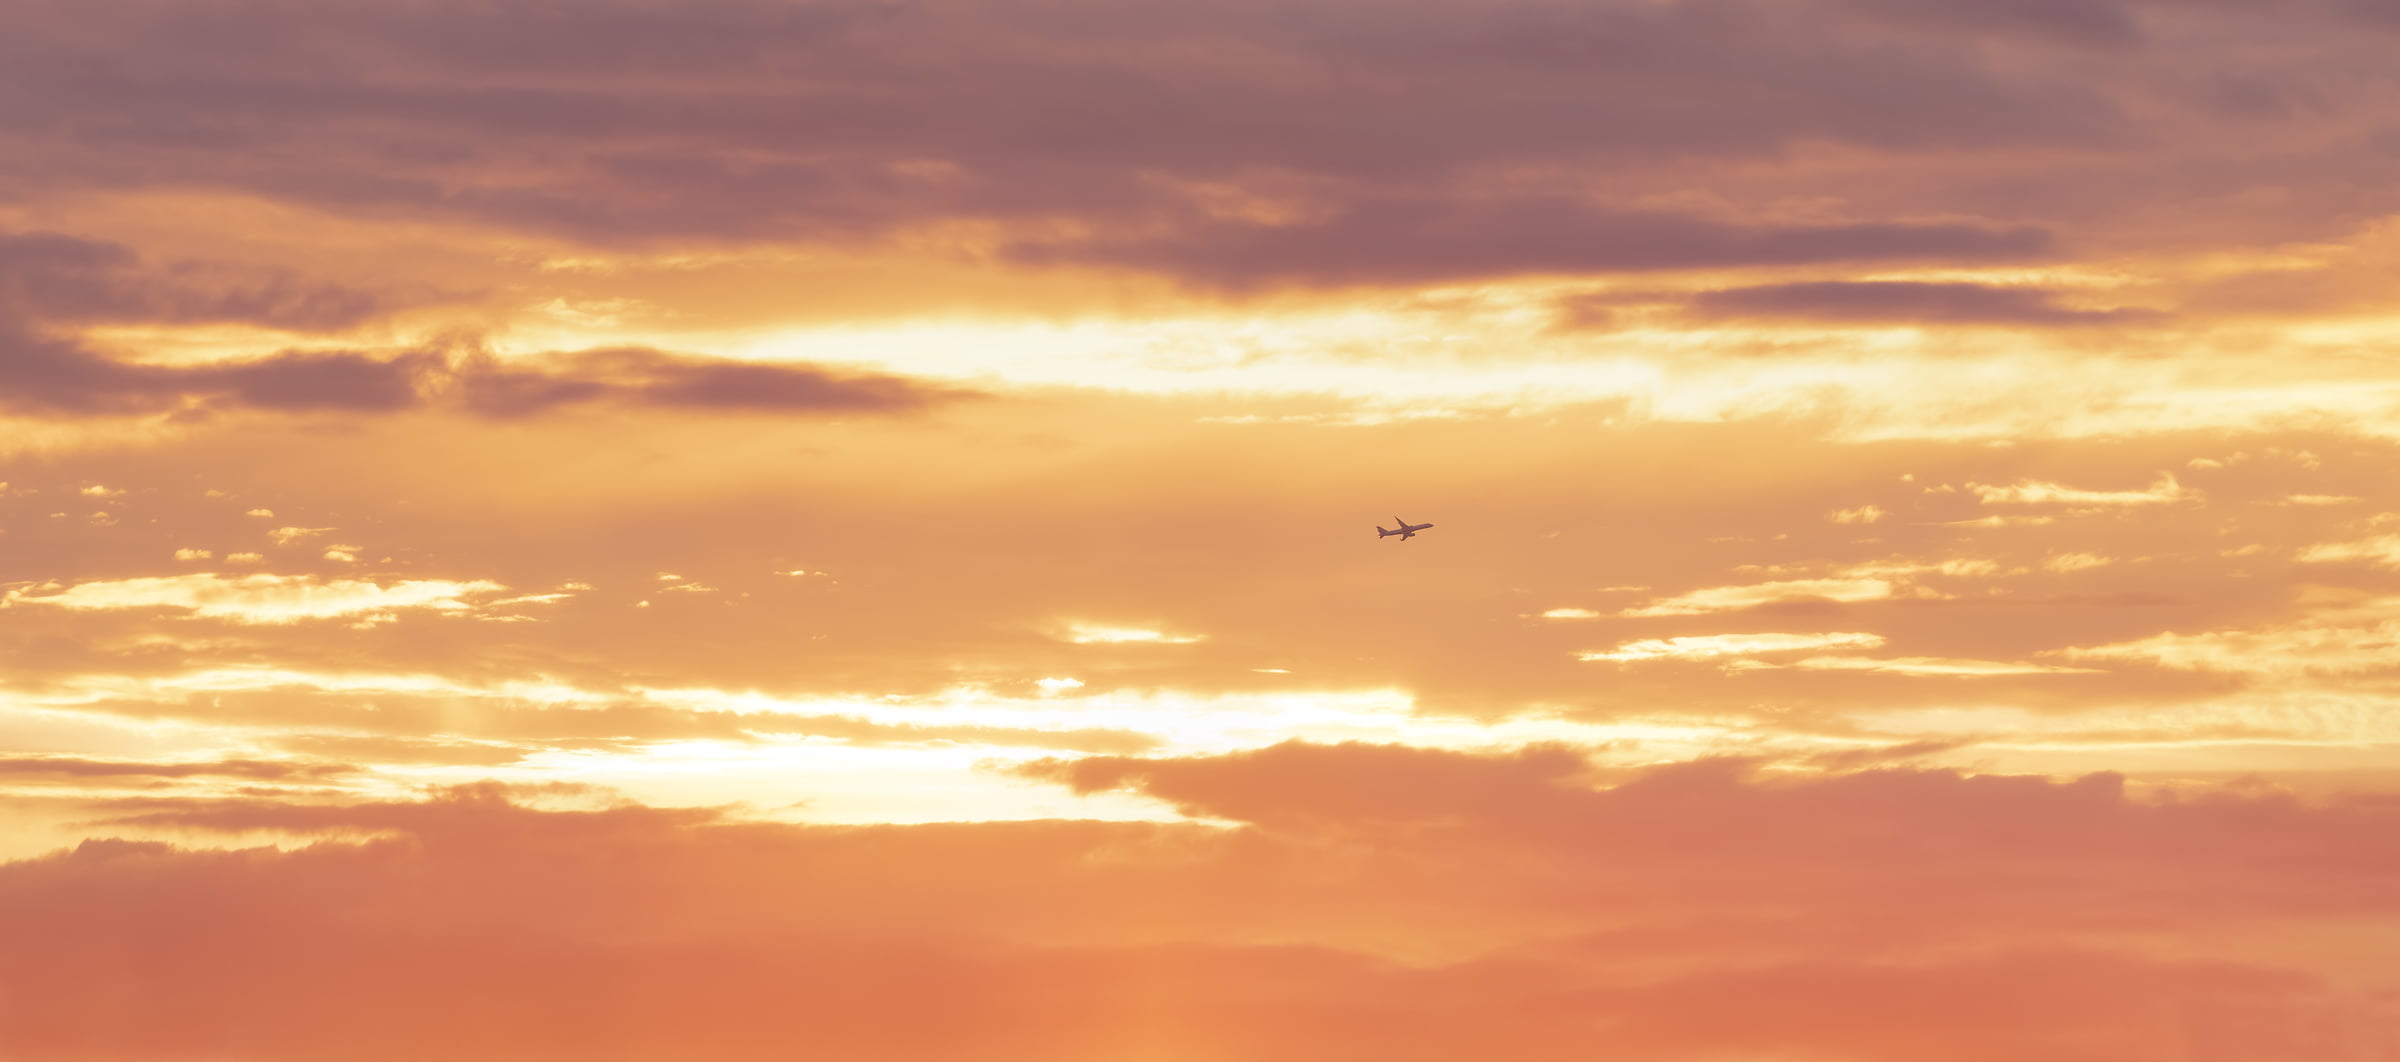 328 megapixels! A very high resolution, large-format VAST photo print of a plane backdropped by a beautiful sunset; photograph created by Dan Piech in New York City